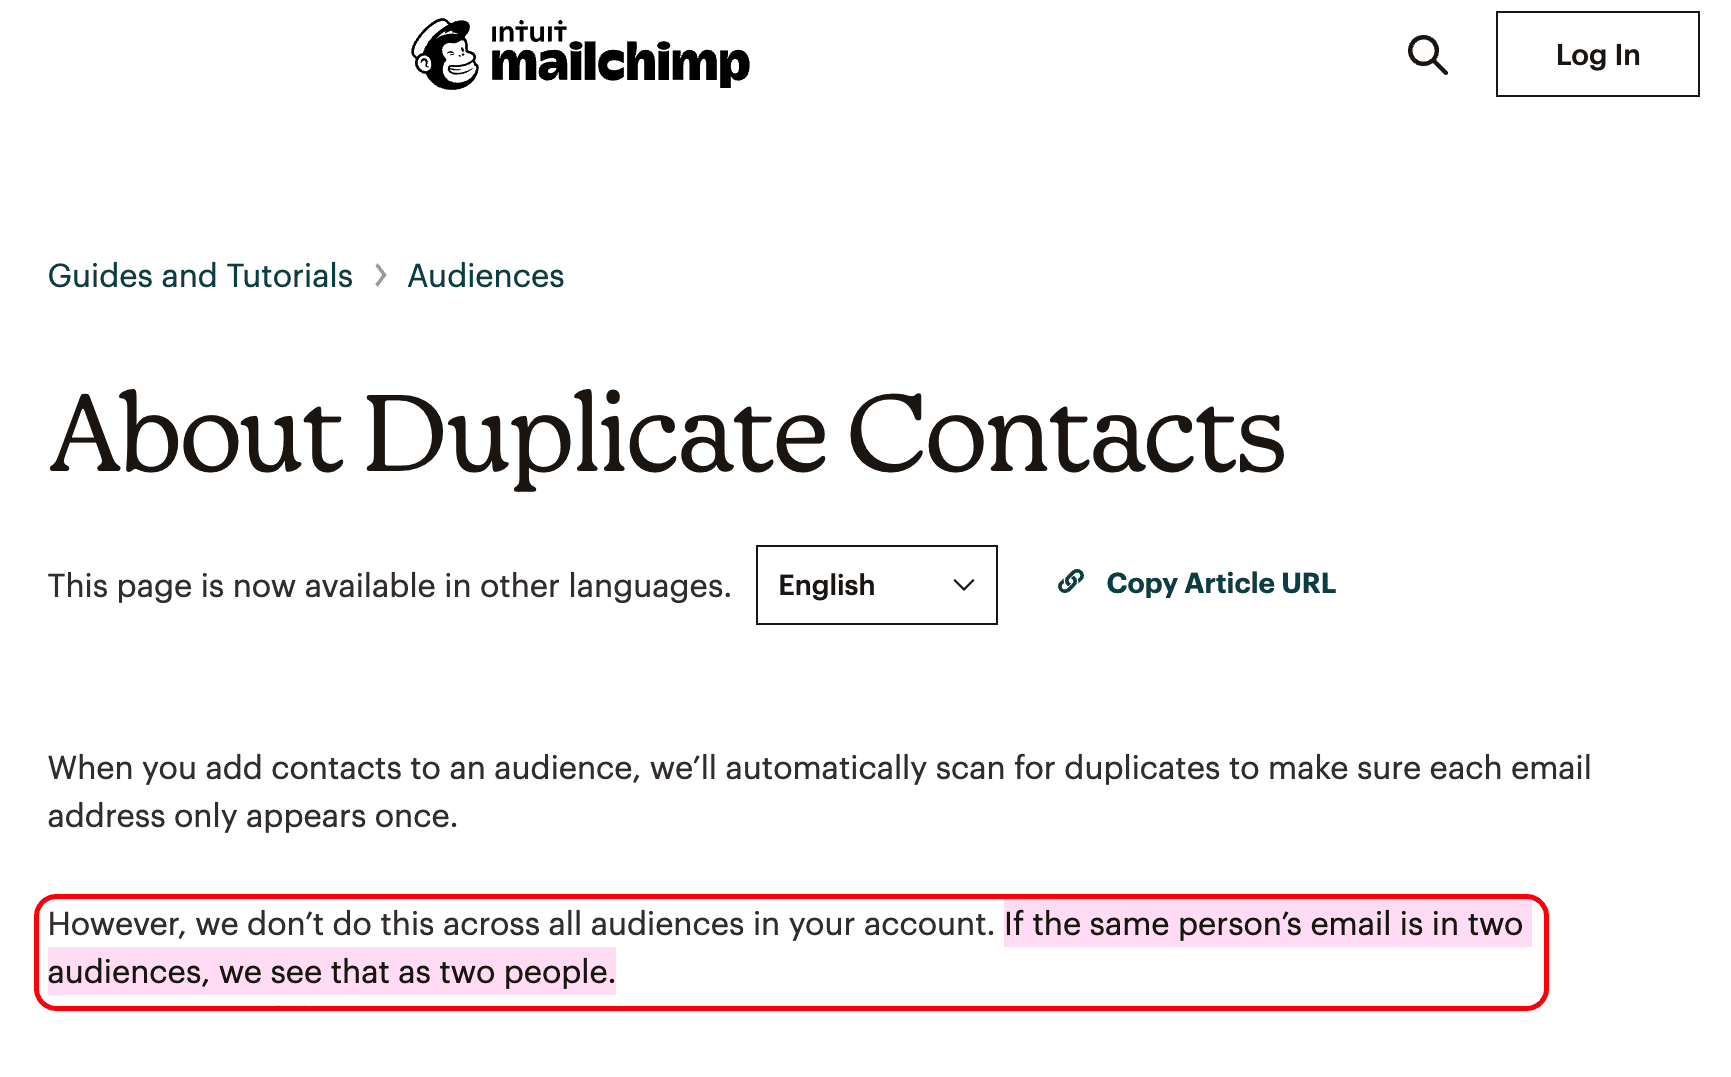 Mailchimp charges for duplicate contacts